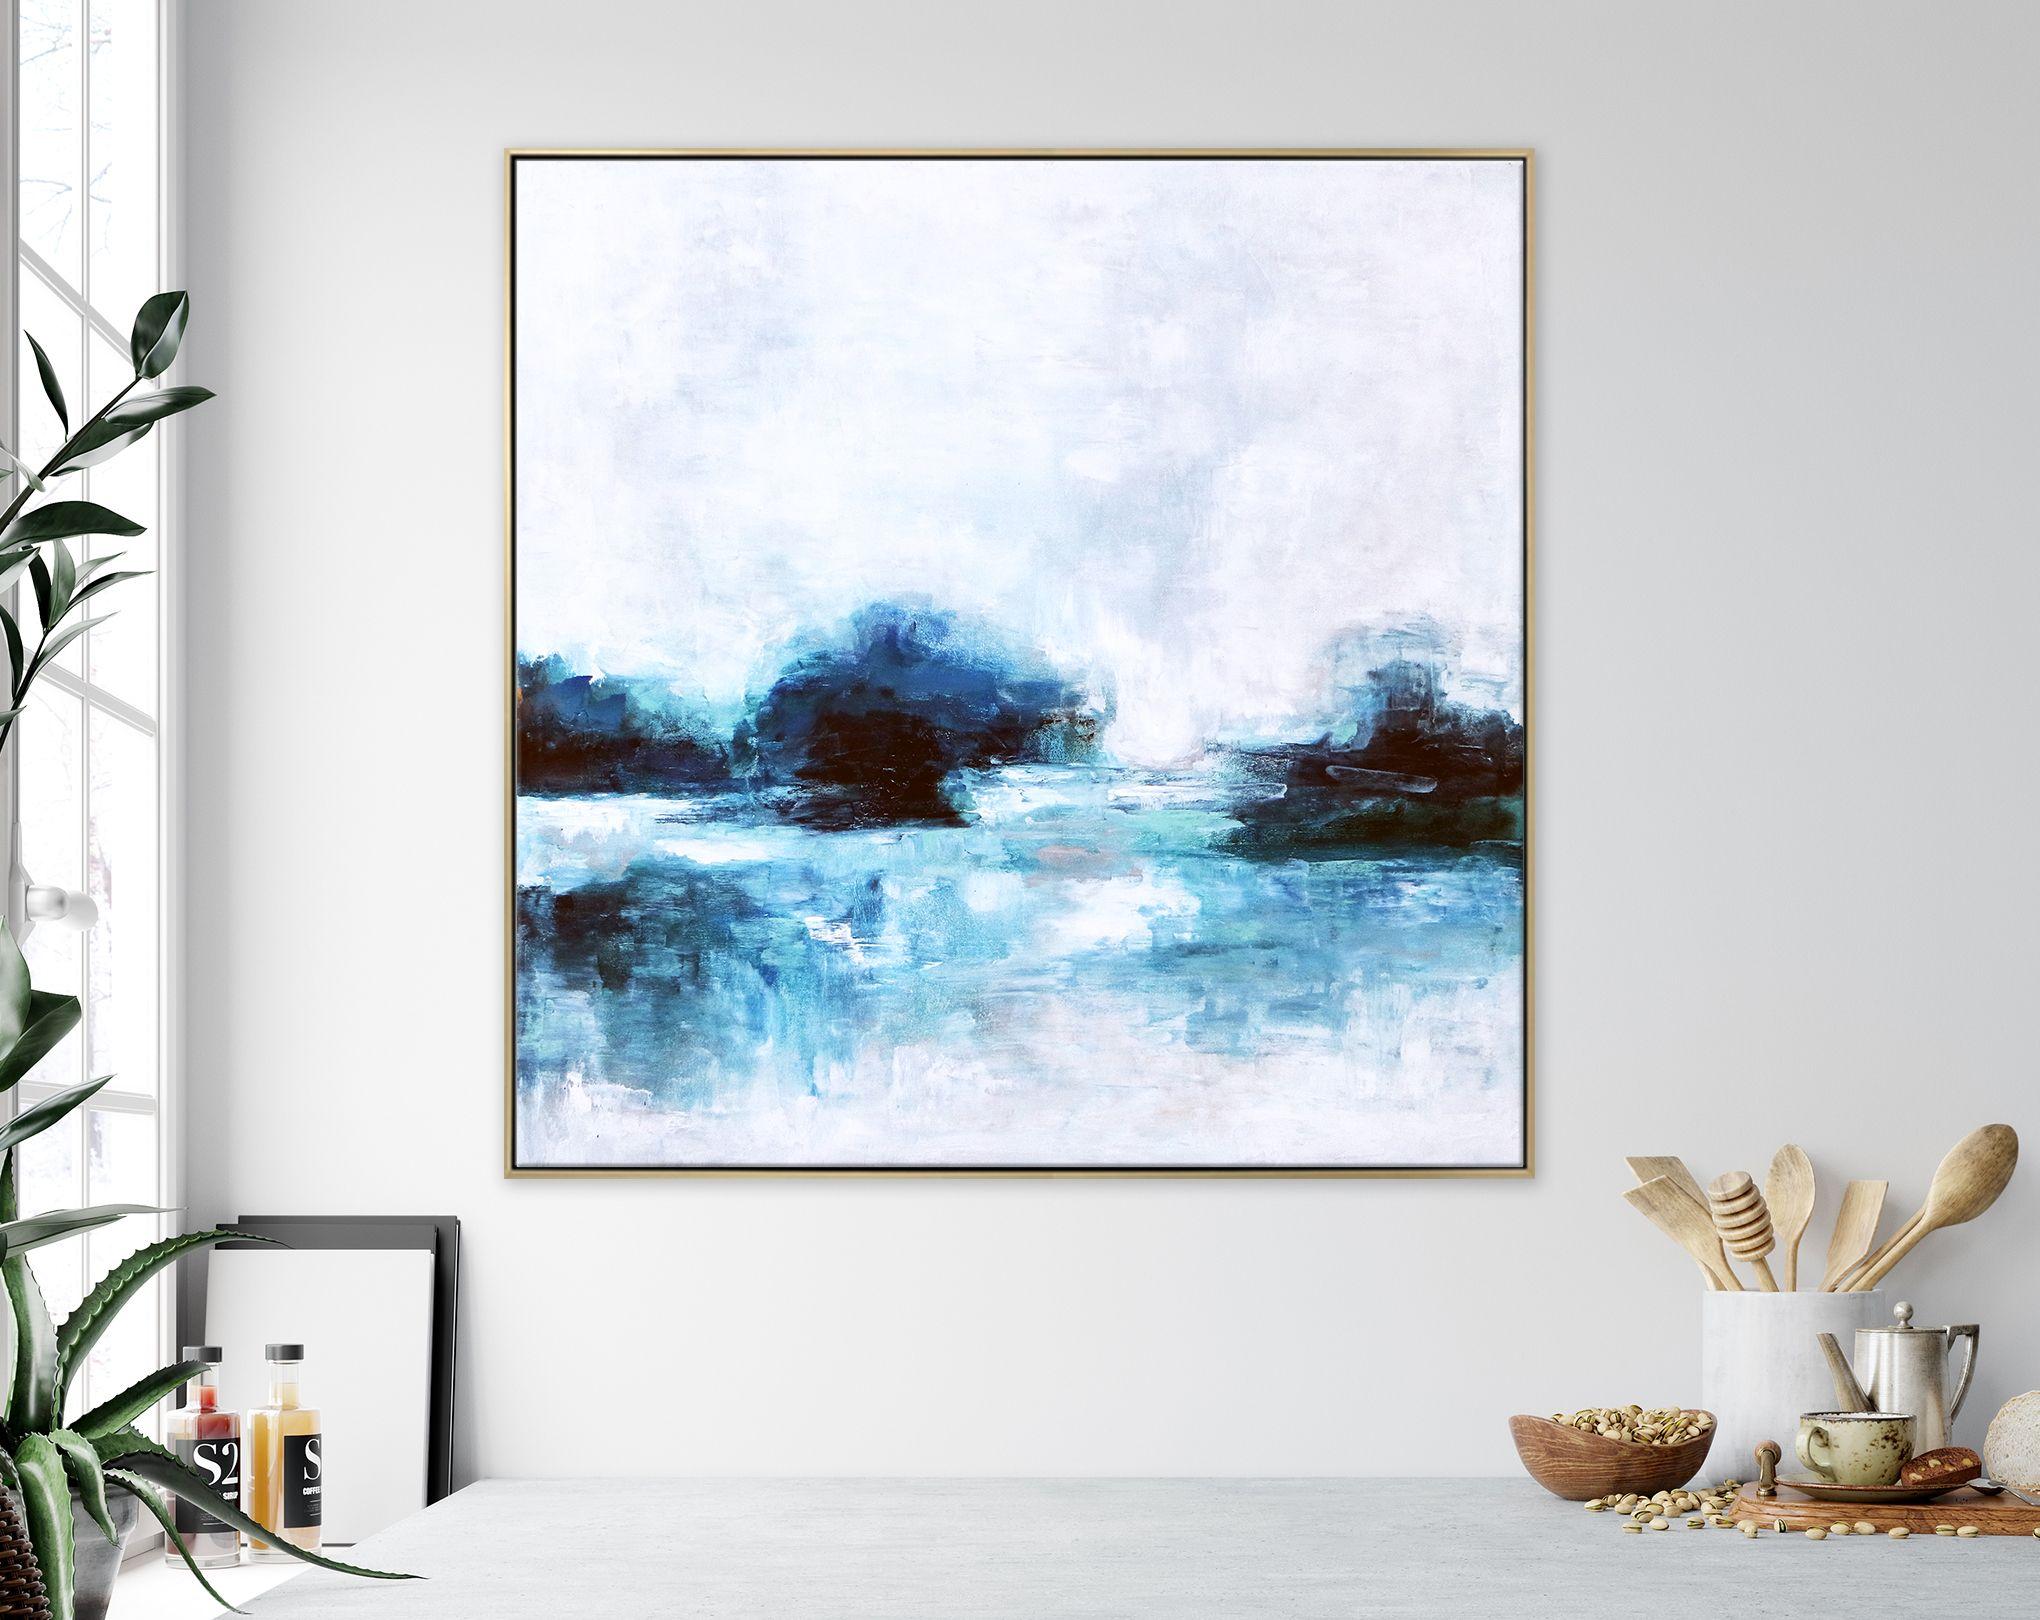 A seascape, acrylic painting on canvas, Colors of white, blue and teal. â€¢ PICTURE HANGER ATTACHED: Yes â€¢ SIDES PAINTED: Yes â€¢ READY TO HANG: Yes â€¢ ARTIST SIGNED: Yes â€¢ CERTIFICATE OF AUTHENTICITY: Yes, This is an Original Painting Not a